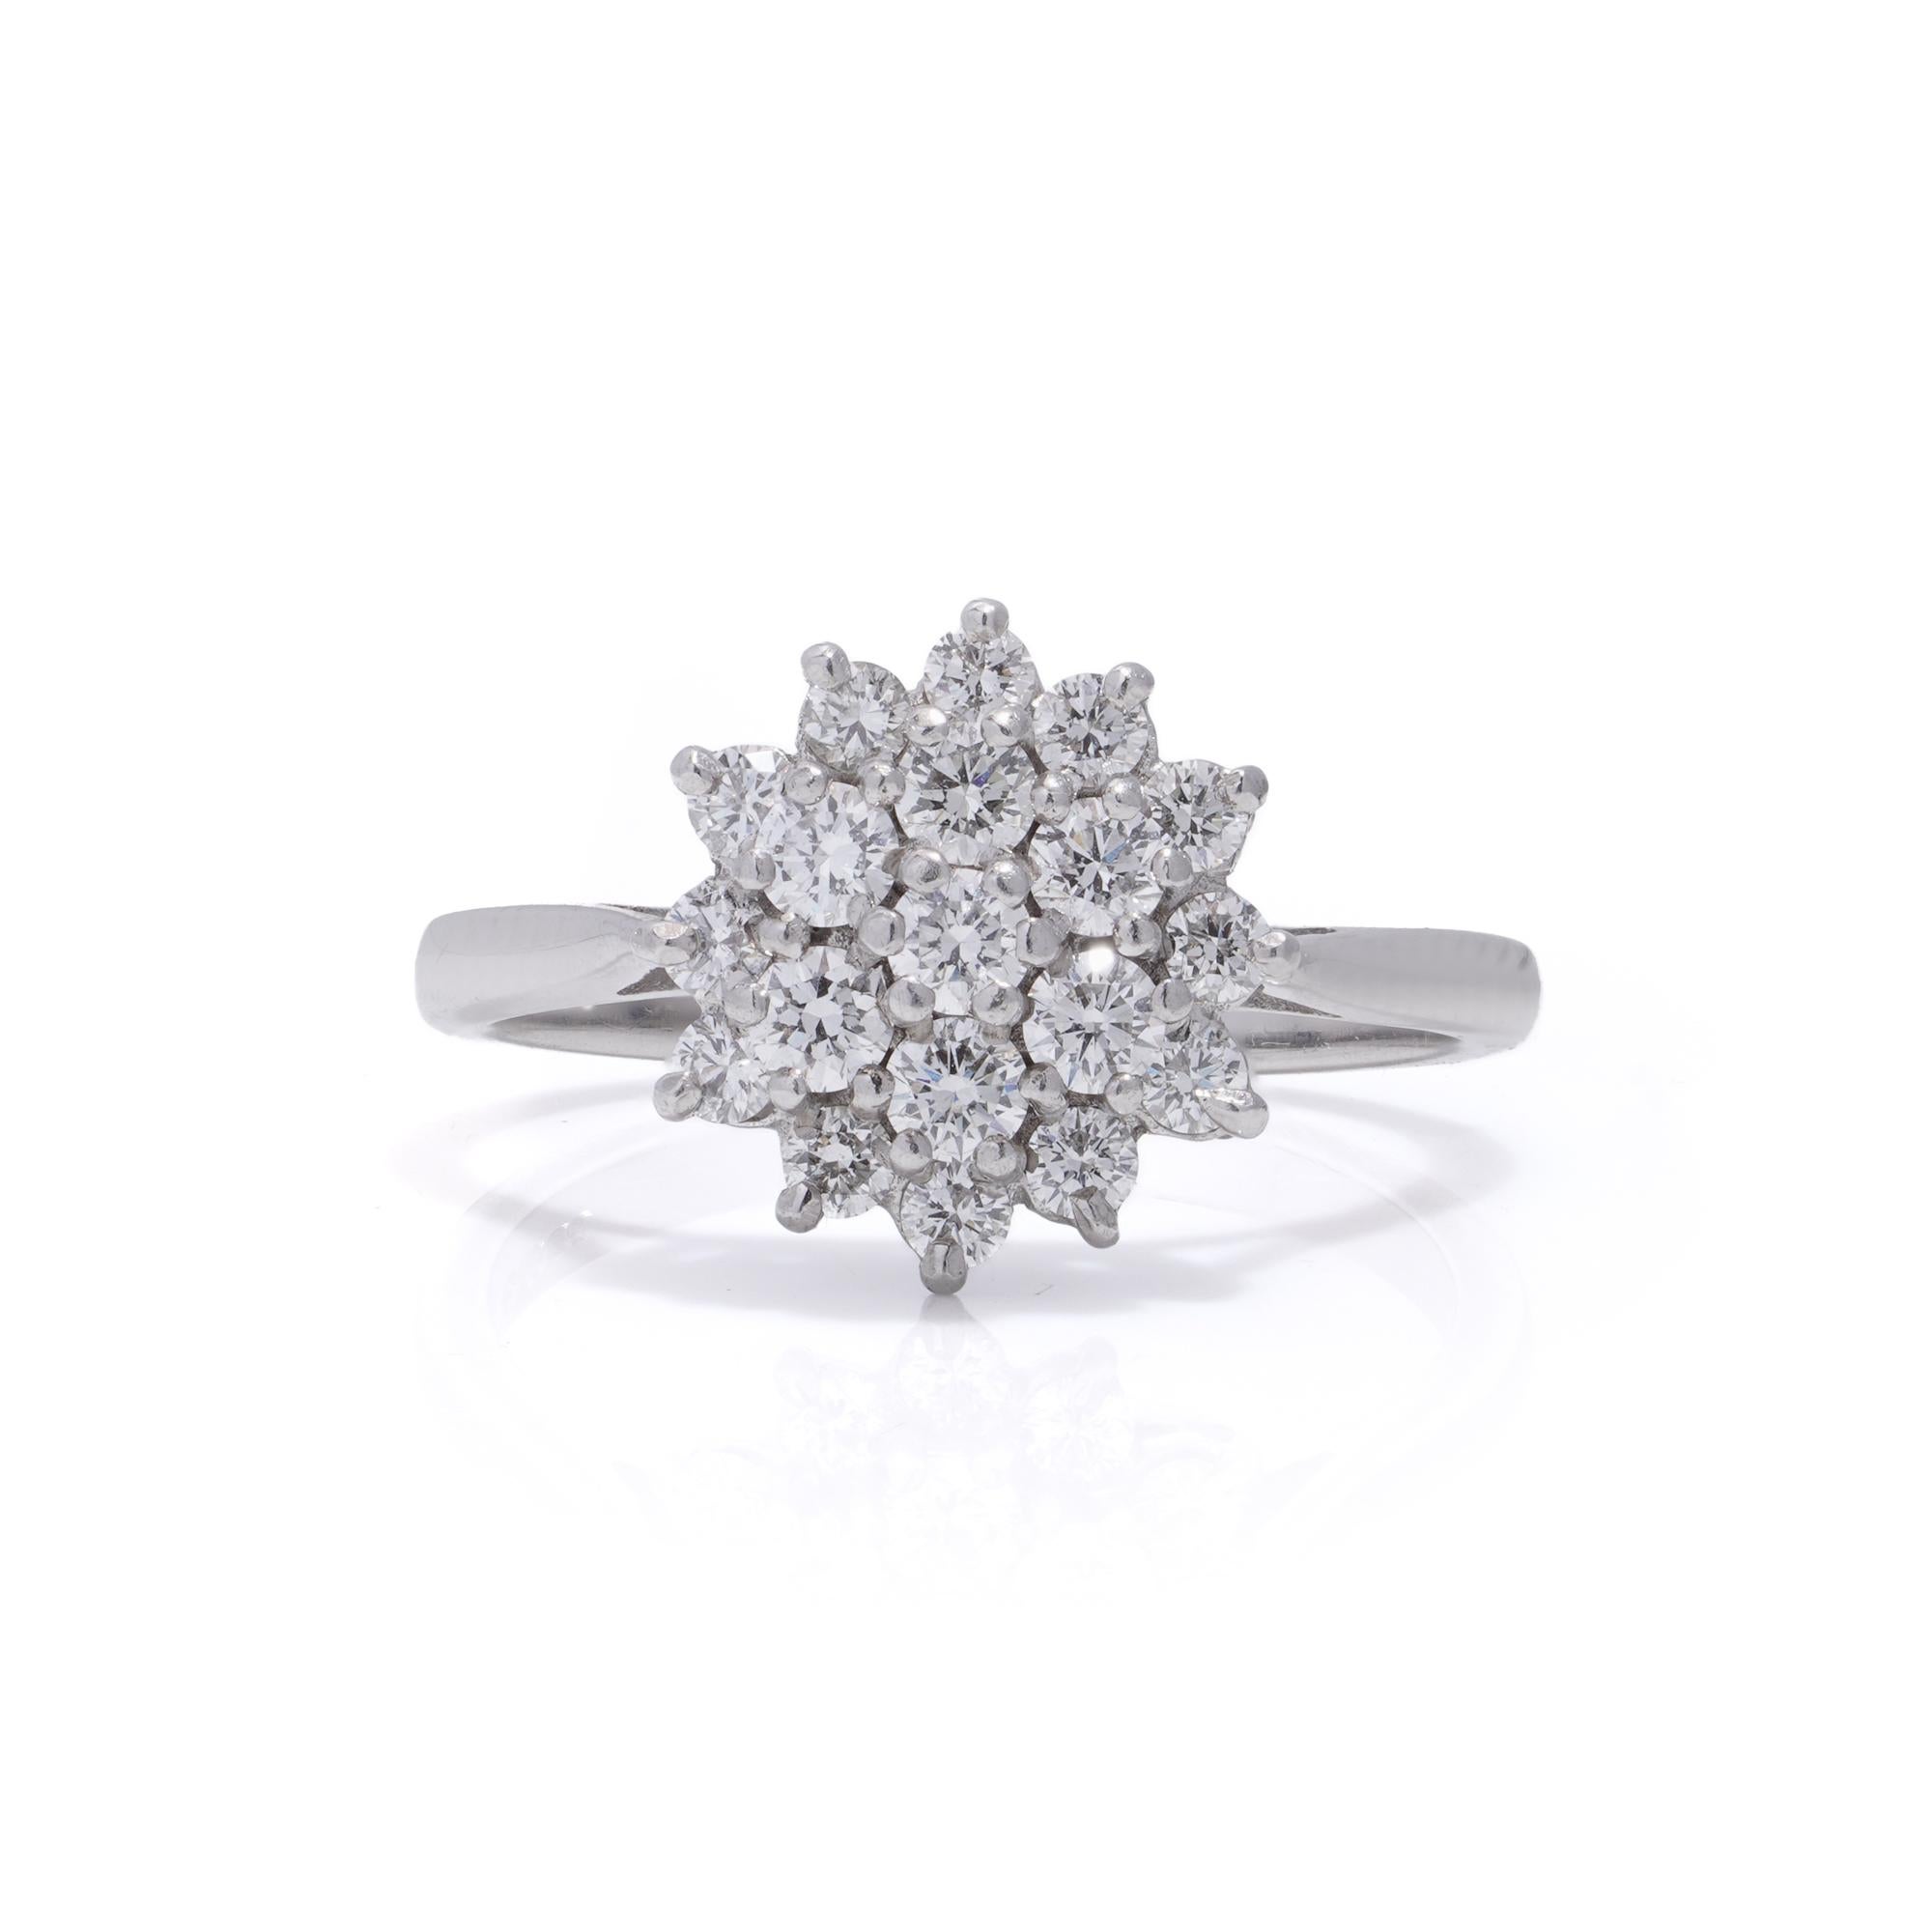 This exquisite Vintage ring boasts an 18kt yellow gold daisy flower design, adorned with dazzling diamonds. At its heart, a brilliant round cut diamond shines, encircled by eight smaller diamonds. The band is elegantly accented with two additional